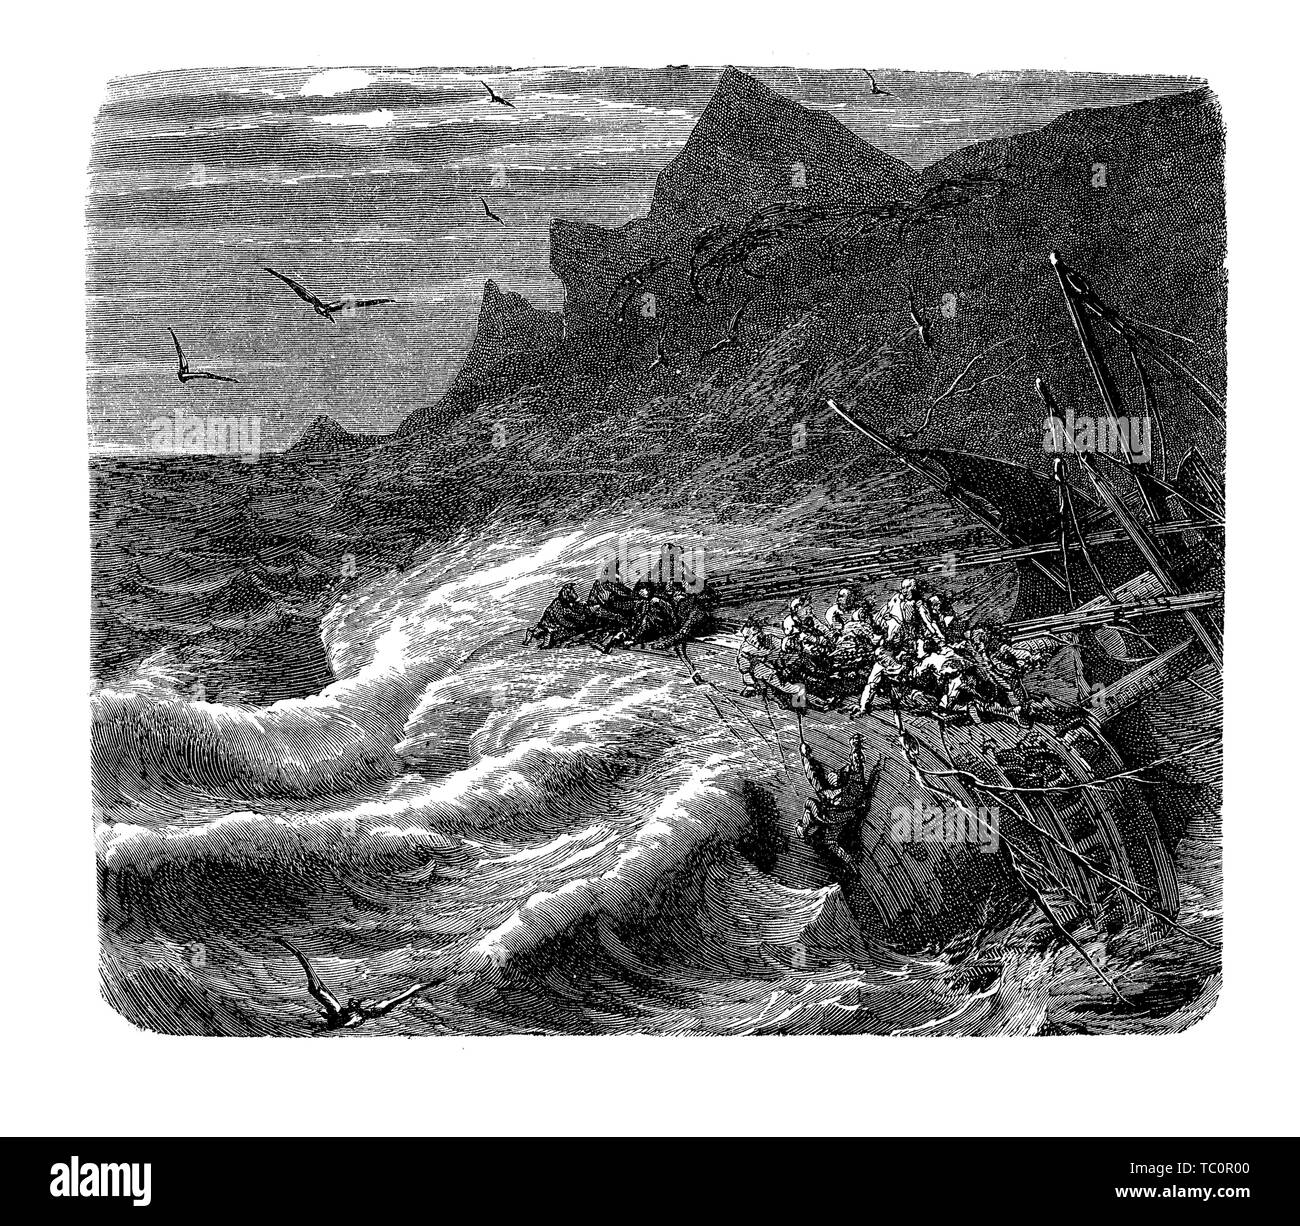 Stranded ship at the mercy of a nasty storm, with waves battering the wreckage and people in danger of life Stock Photo